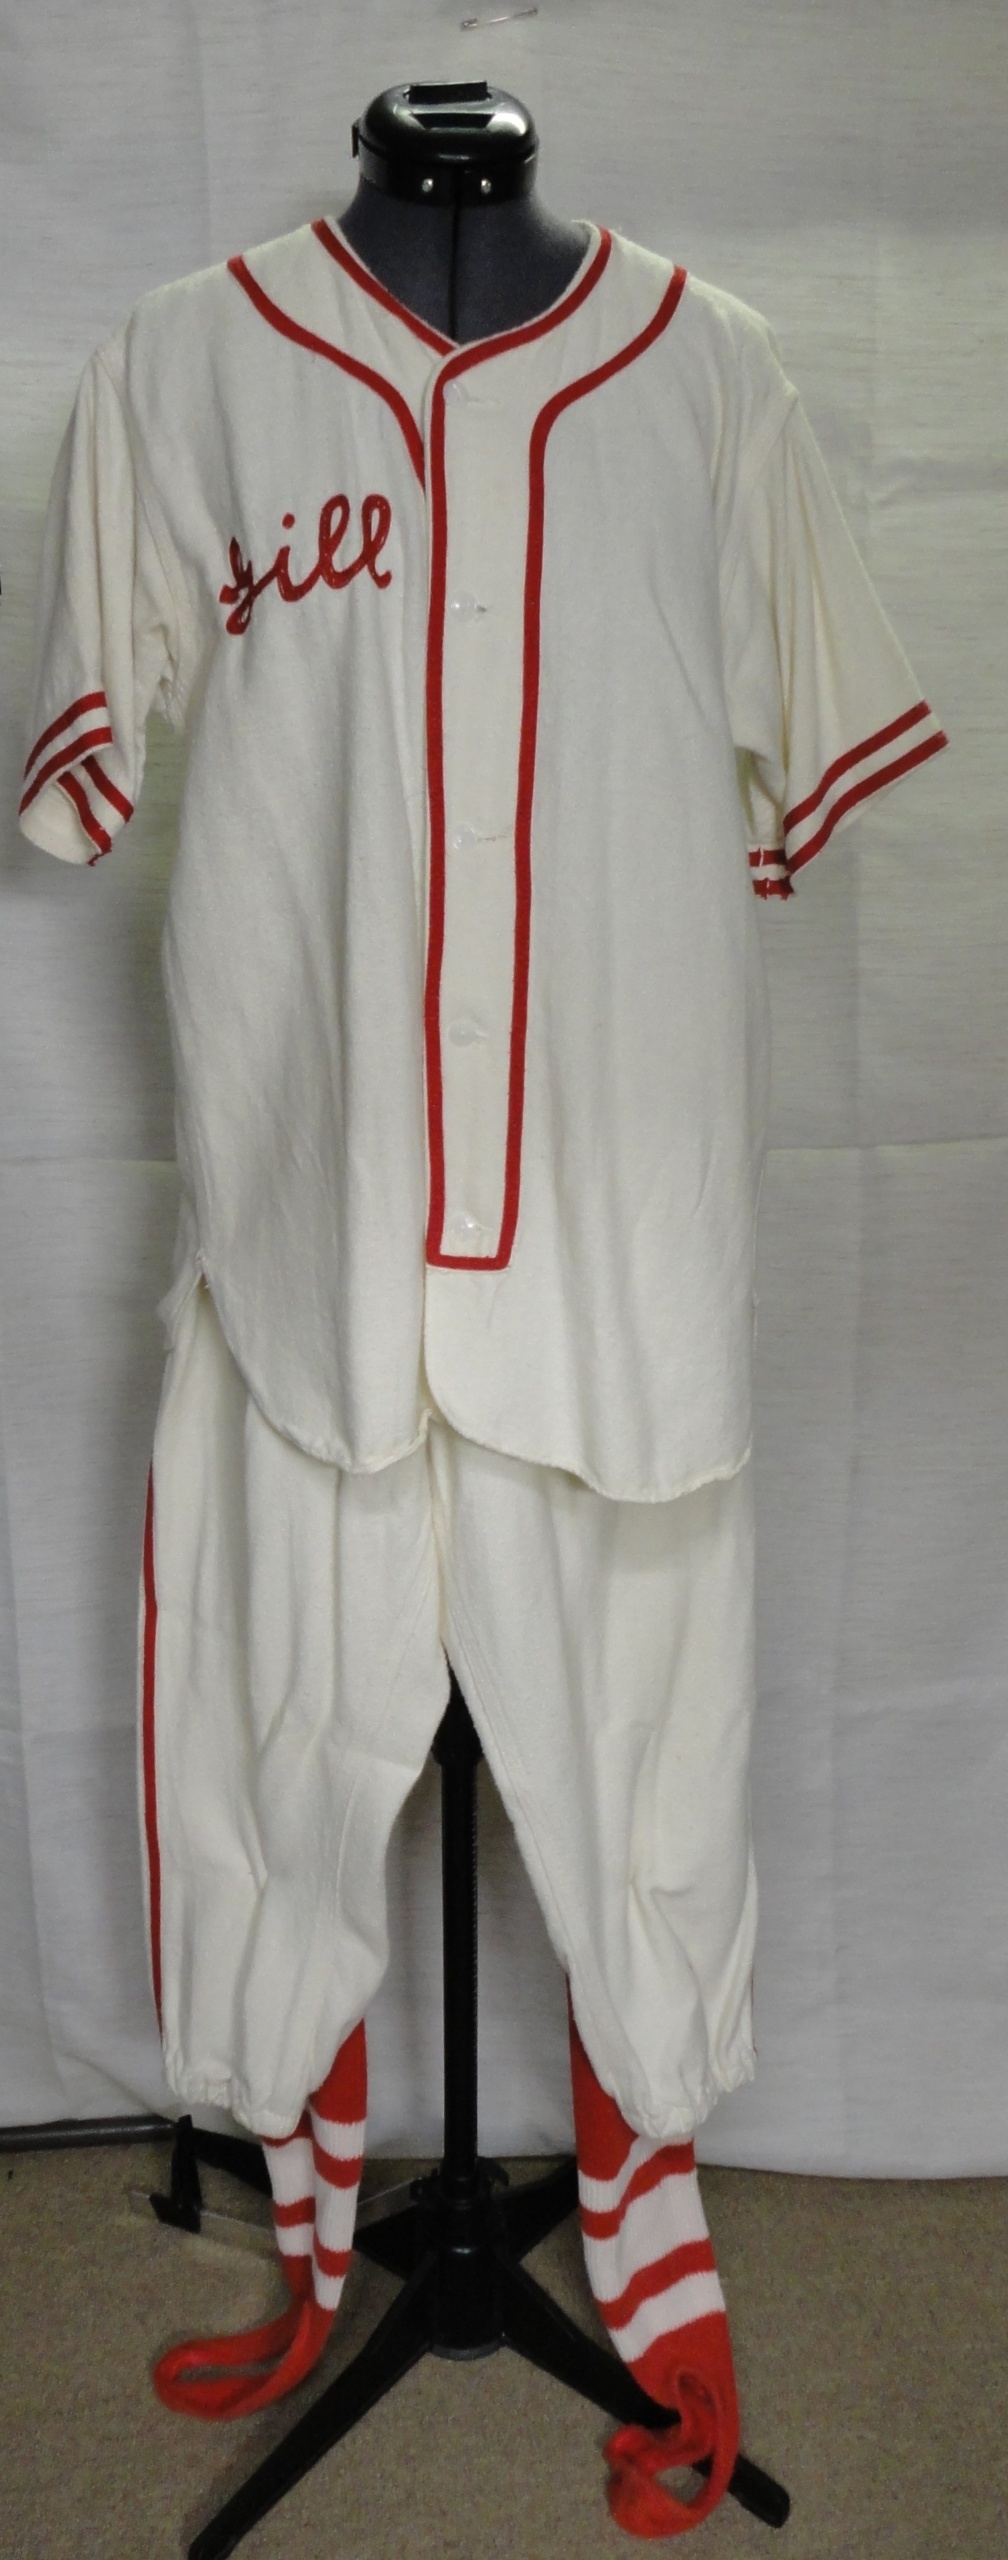 baseball jersey white and red